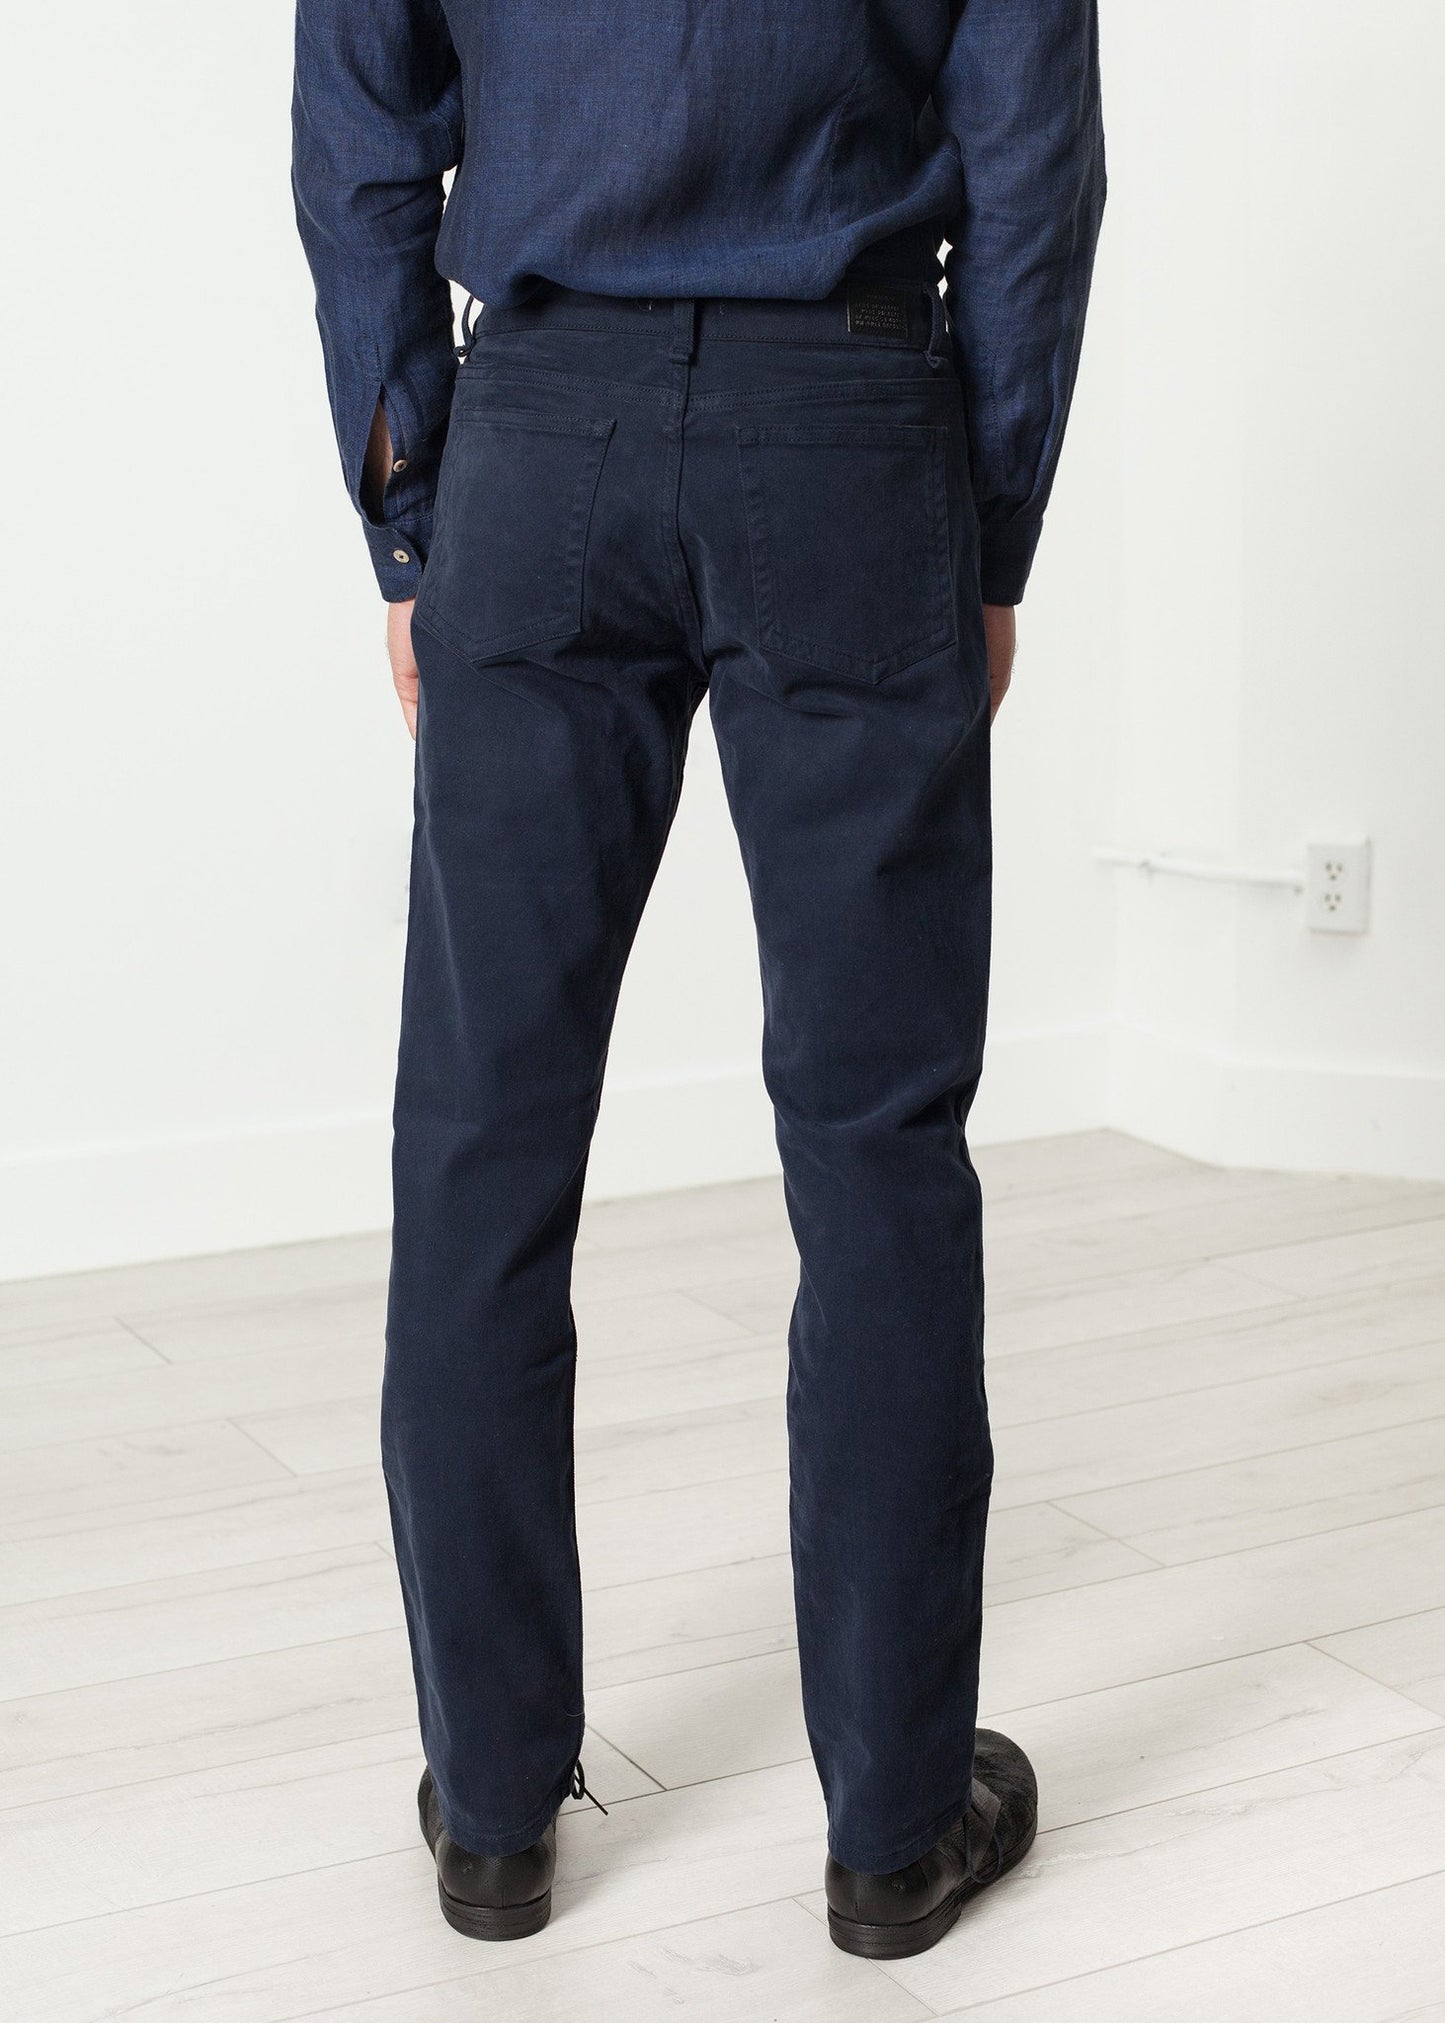 Alex Twill Pant in Navy - annaclothes